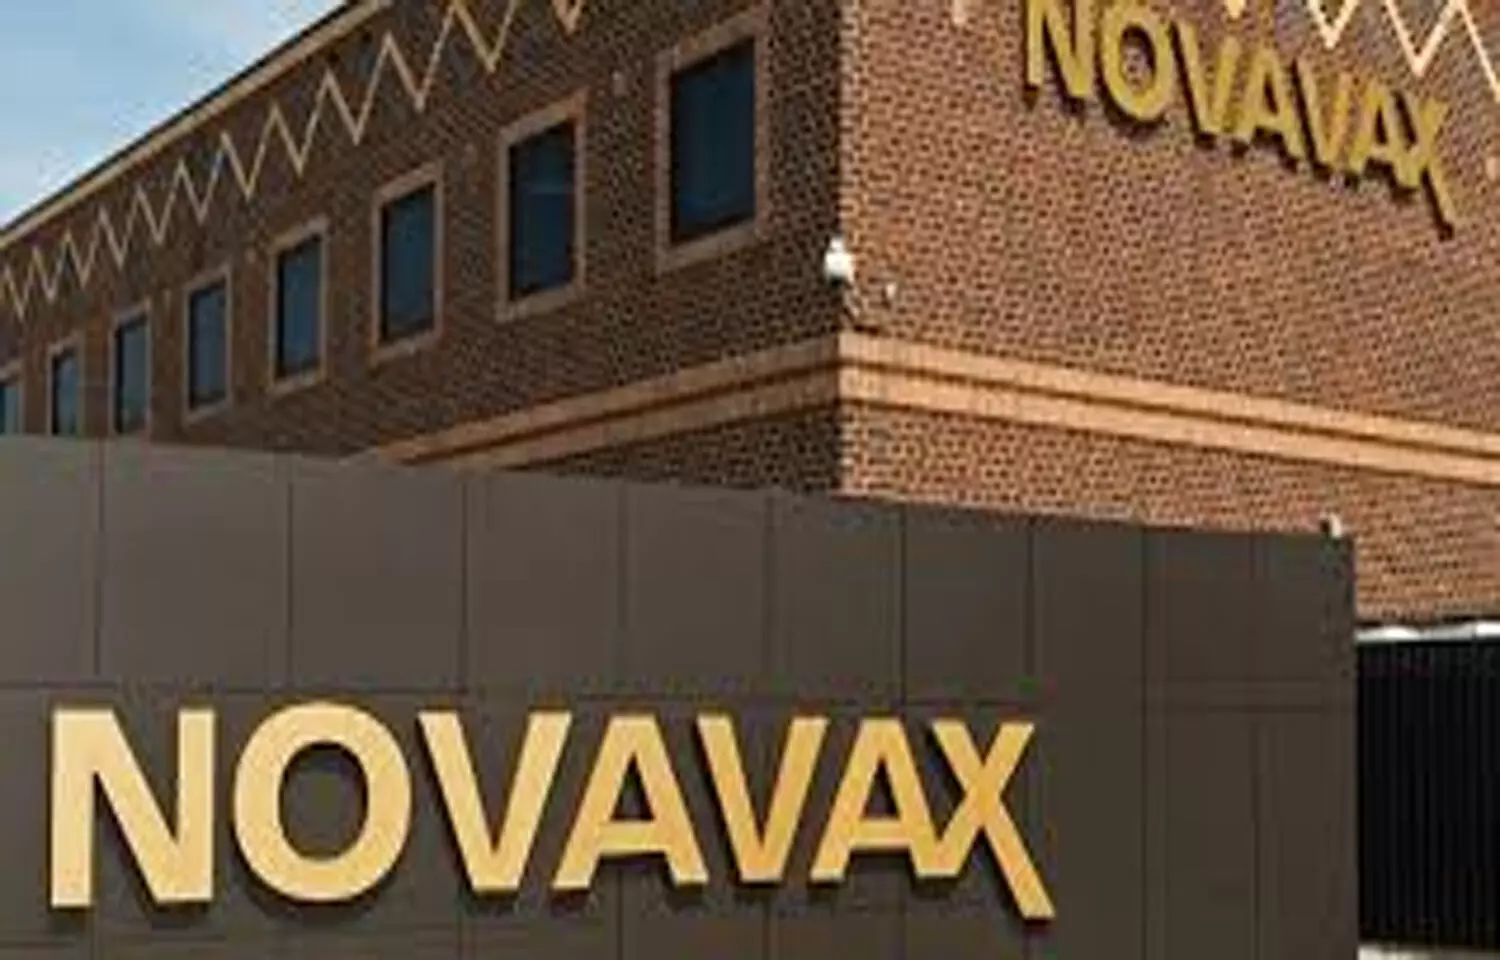 Novavax COVID shot gets USFDA Advisory Committee recommendation for emergency use nod for 18 years and older